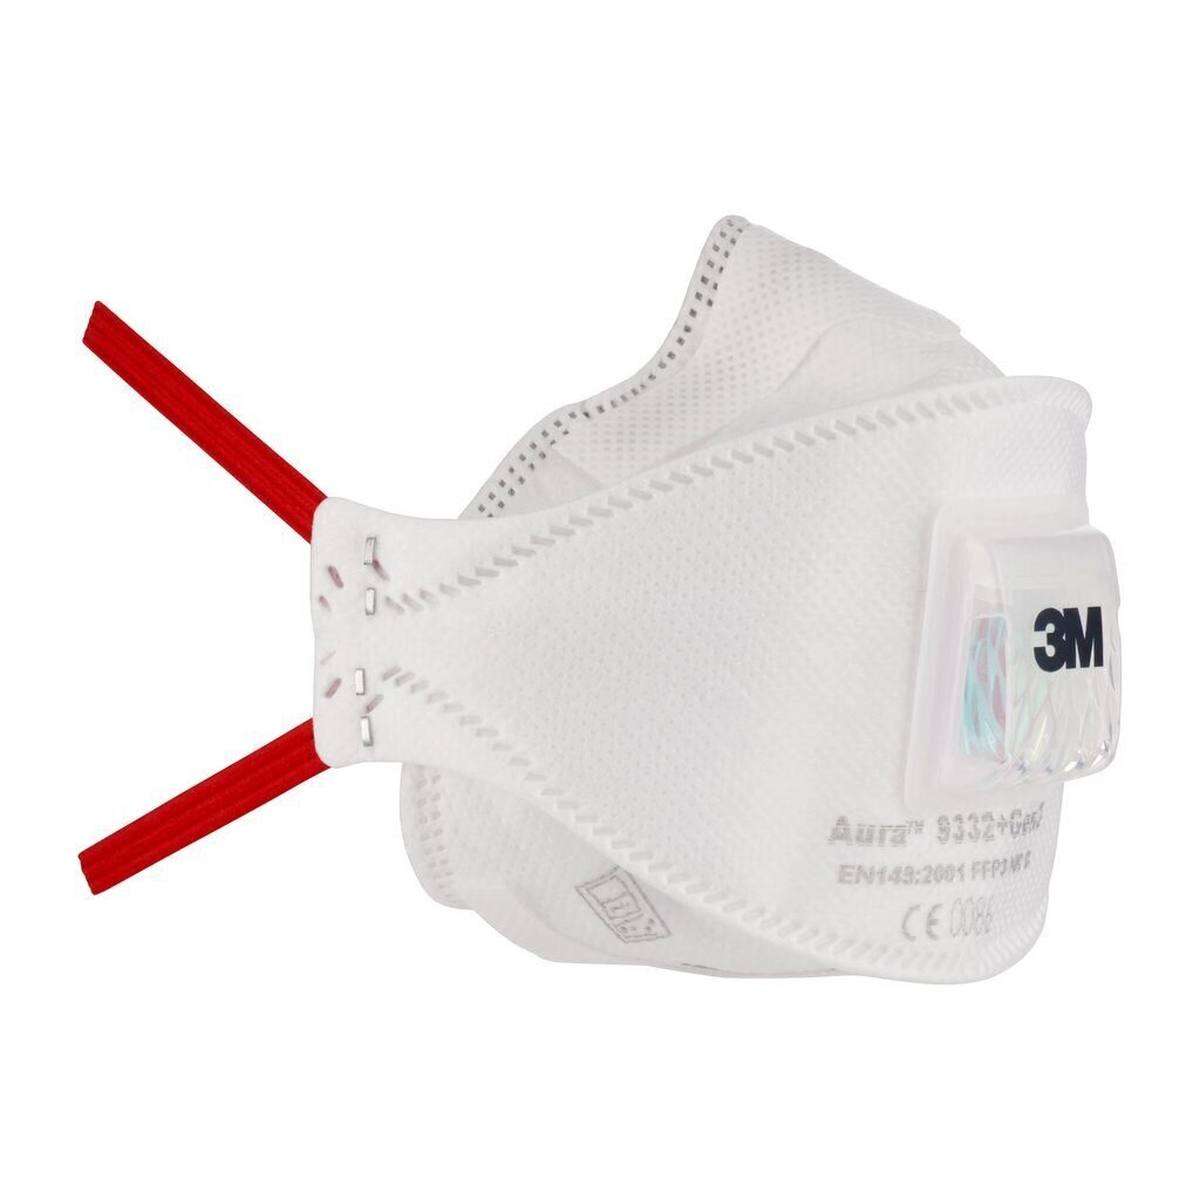 3M 9332+ Gen3 Aura respirator FFP3 with cool-flow exhalation valve, up to 30 times the limit value (hygienically individually packaged)